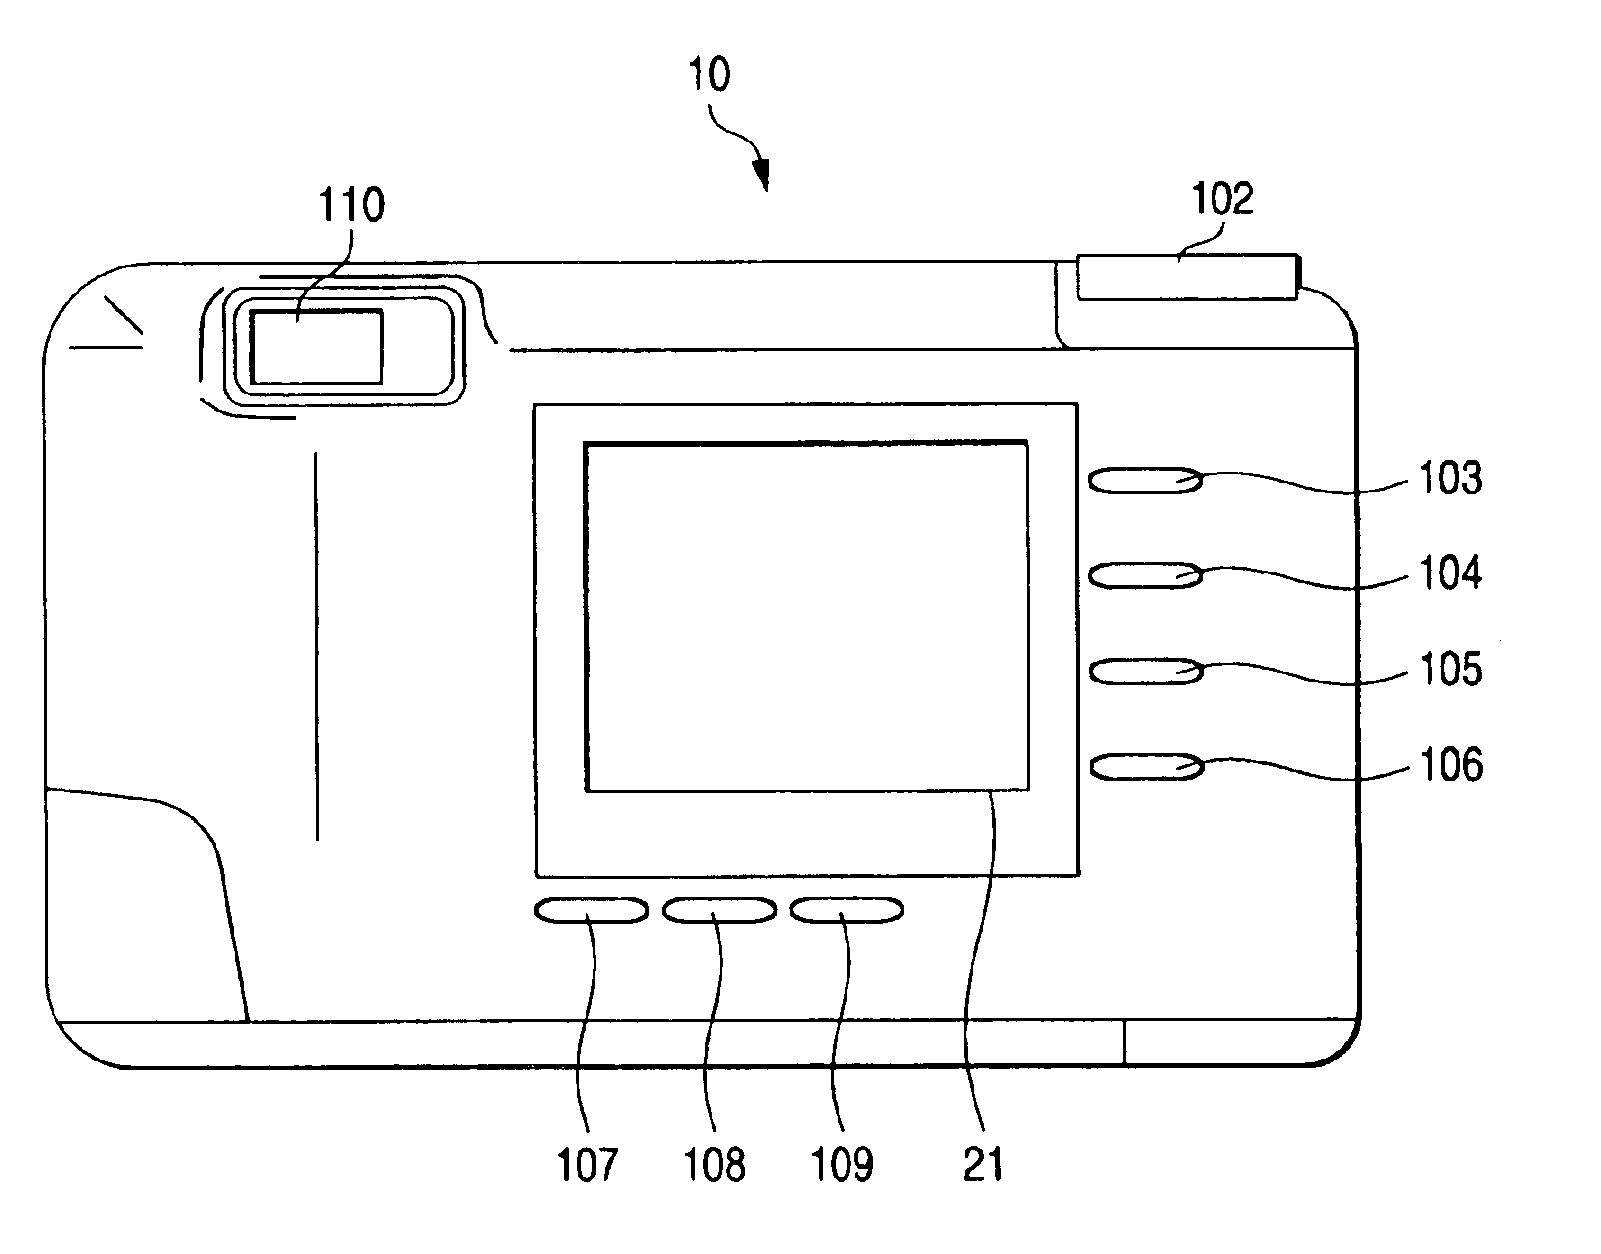 Digital camera having input devices and a display capable of displaying a plurality of set information items